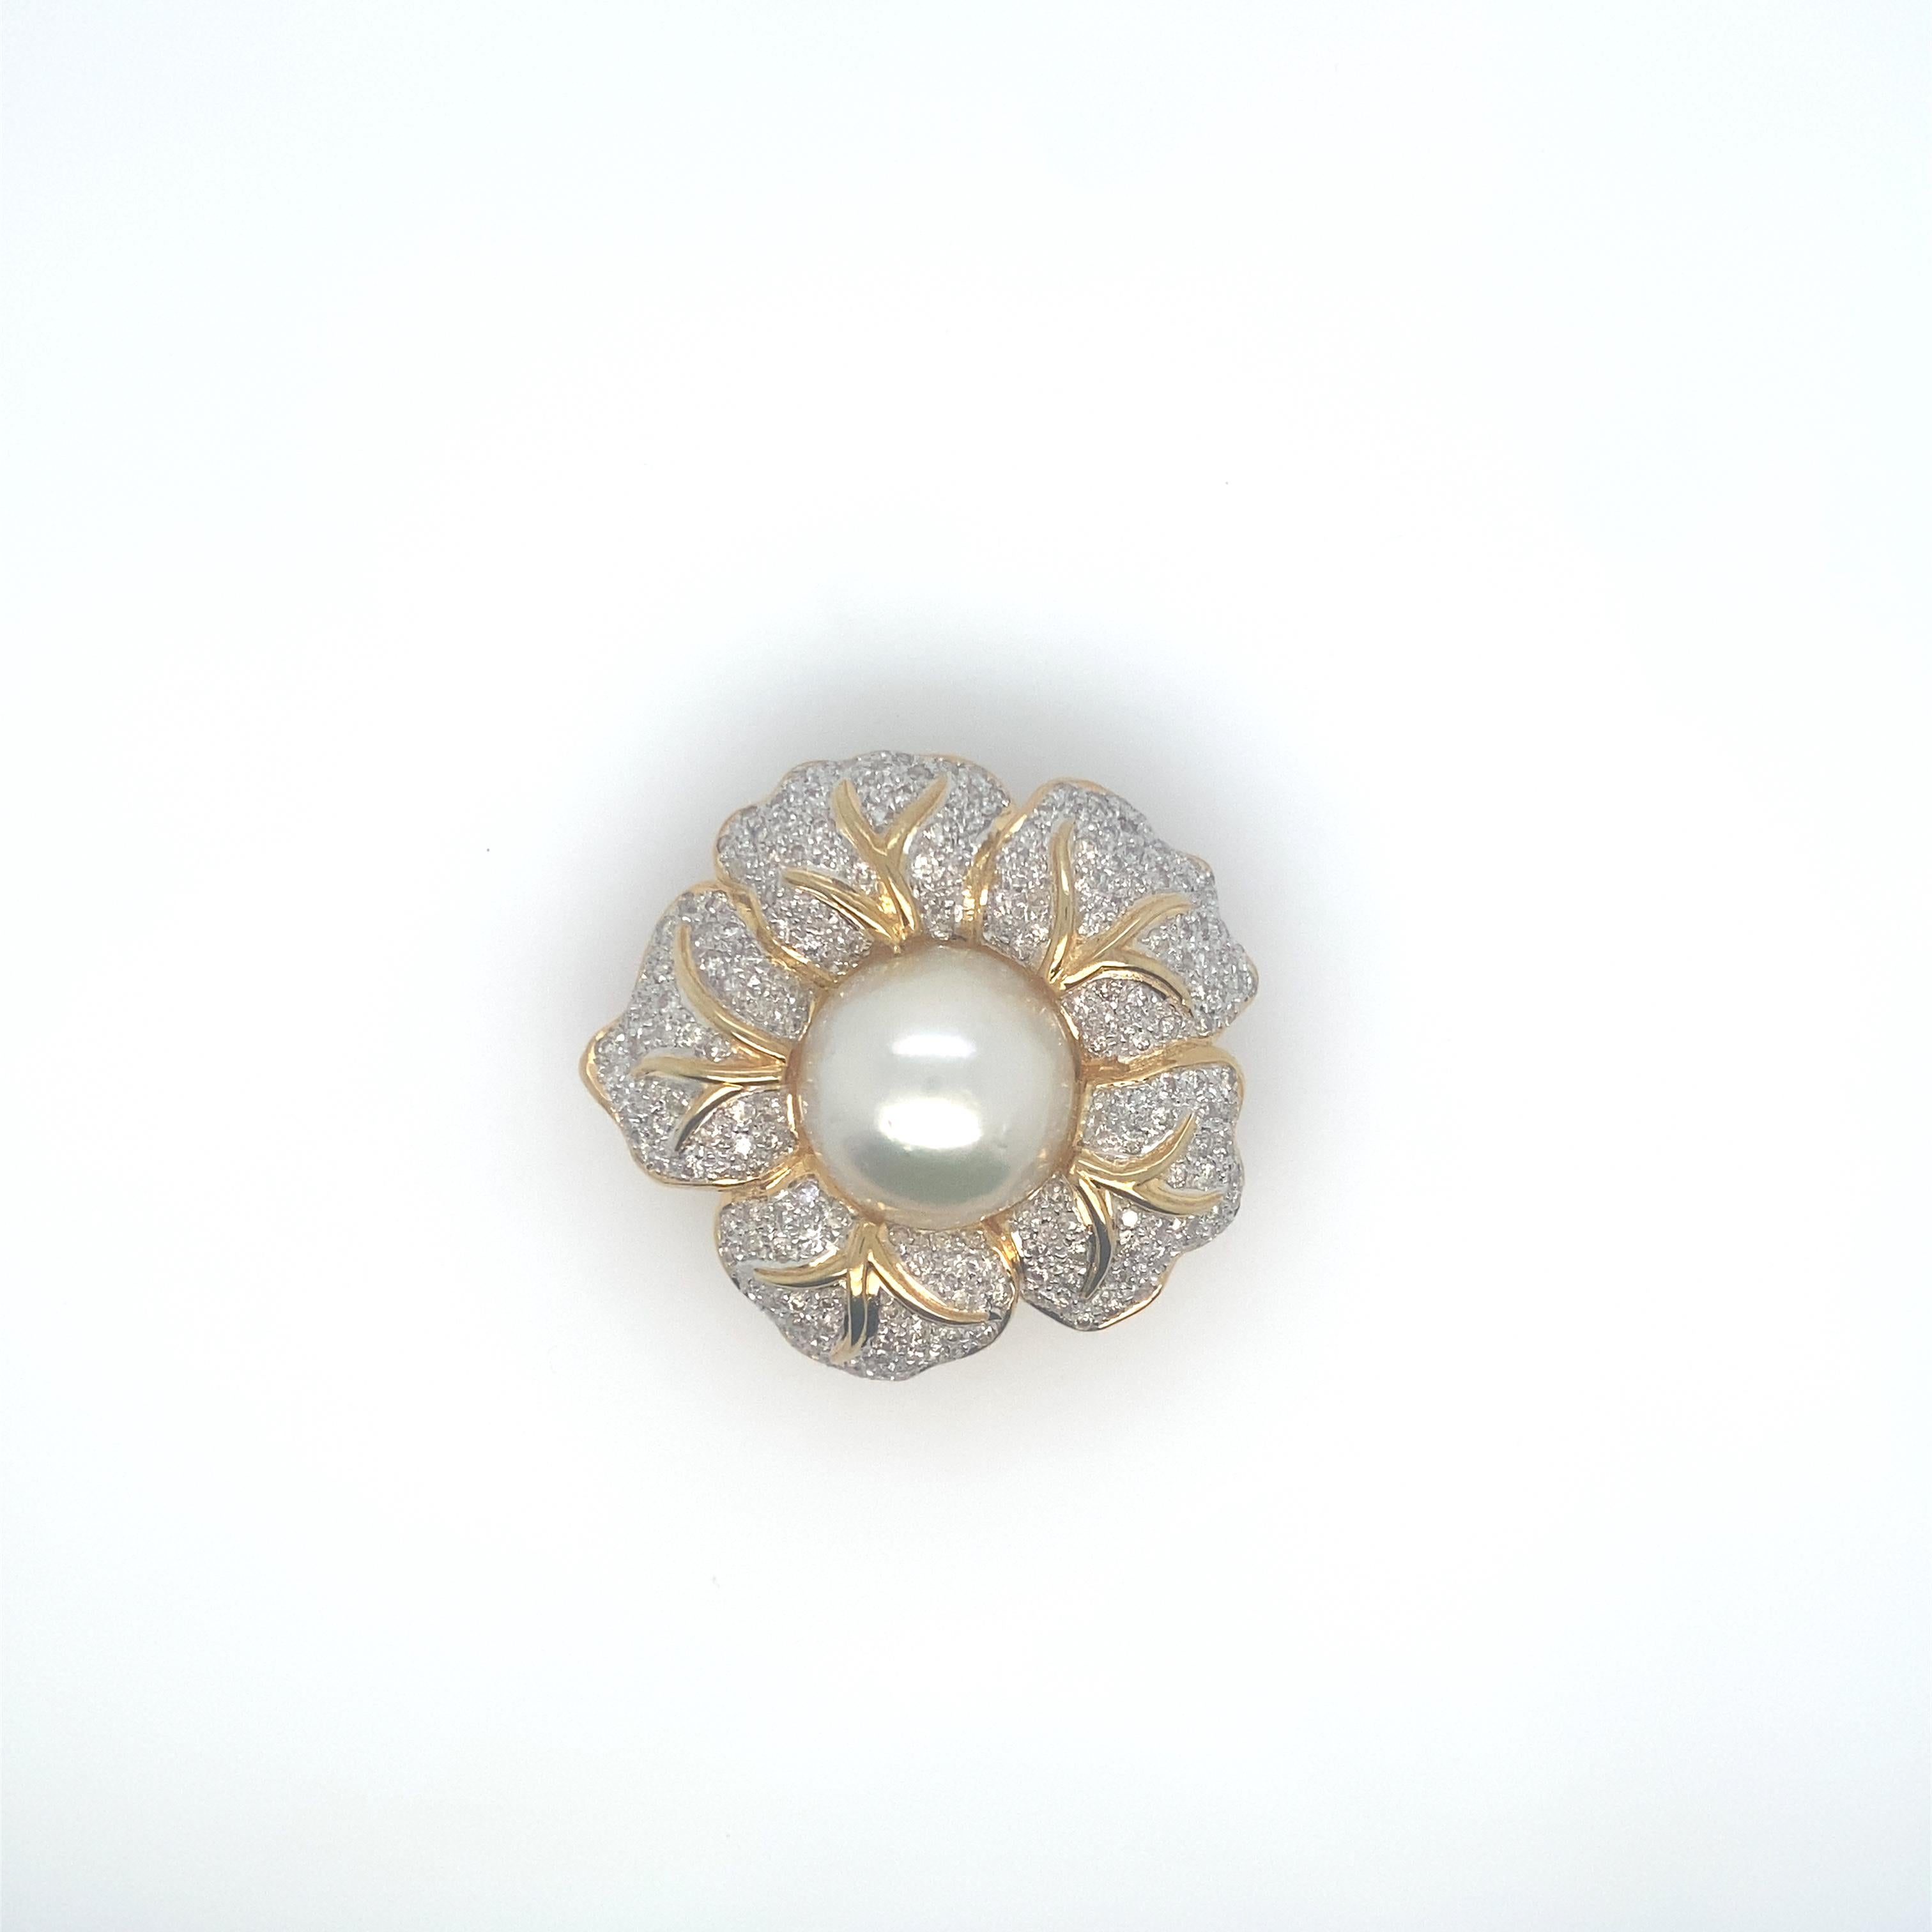 LAST PRICE REDUCTION! Get it before its GONE! Gorgeous large, rare White South Sea Drop Pearls.  These spectacular pearls measure 14.5mm - 18.35mm.  They are very white color, very high lustre, some blemishes.  The necklace with one of clasps on